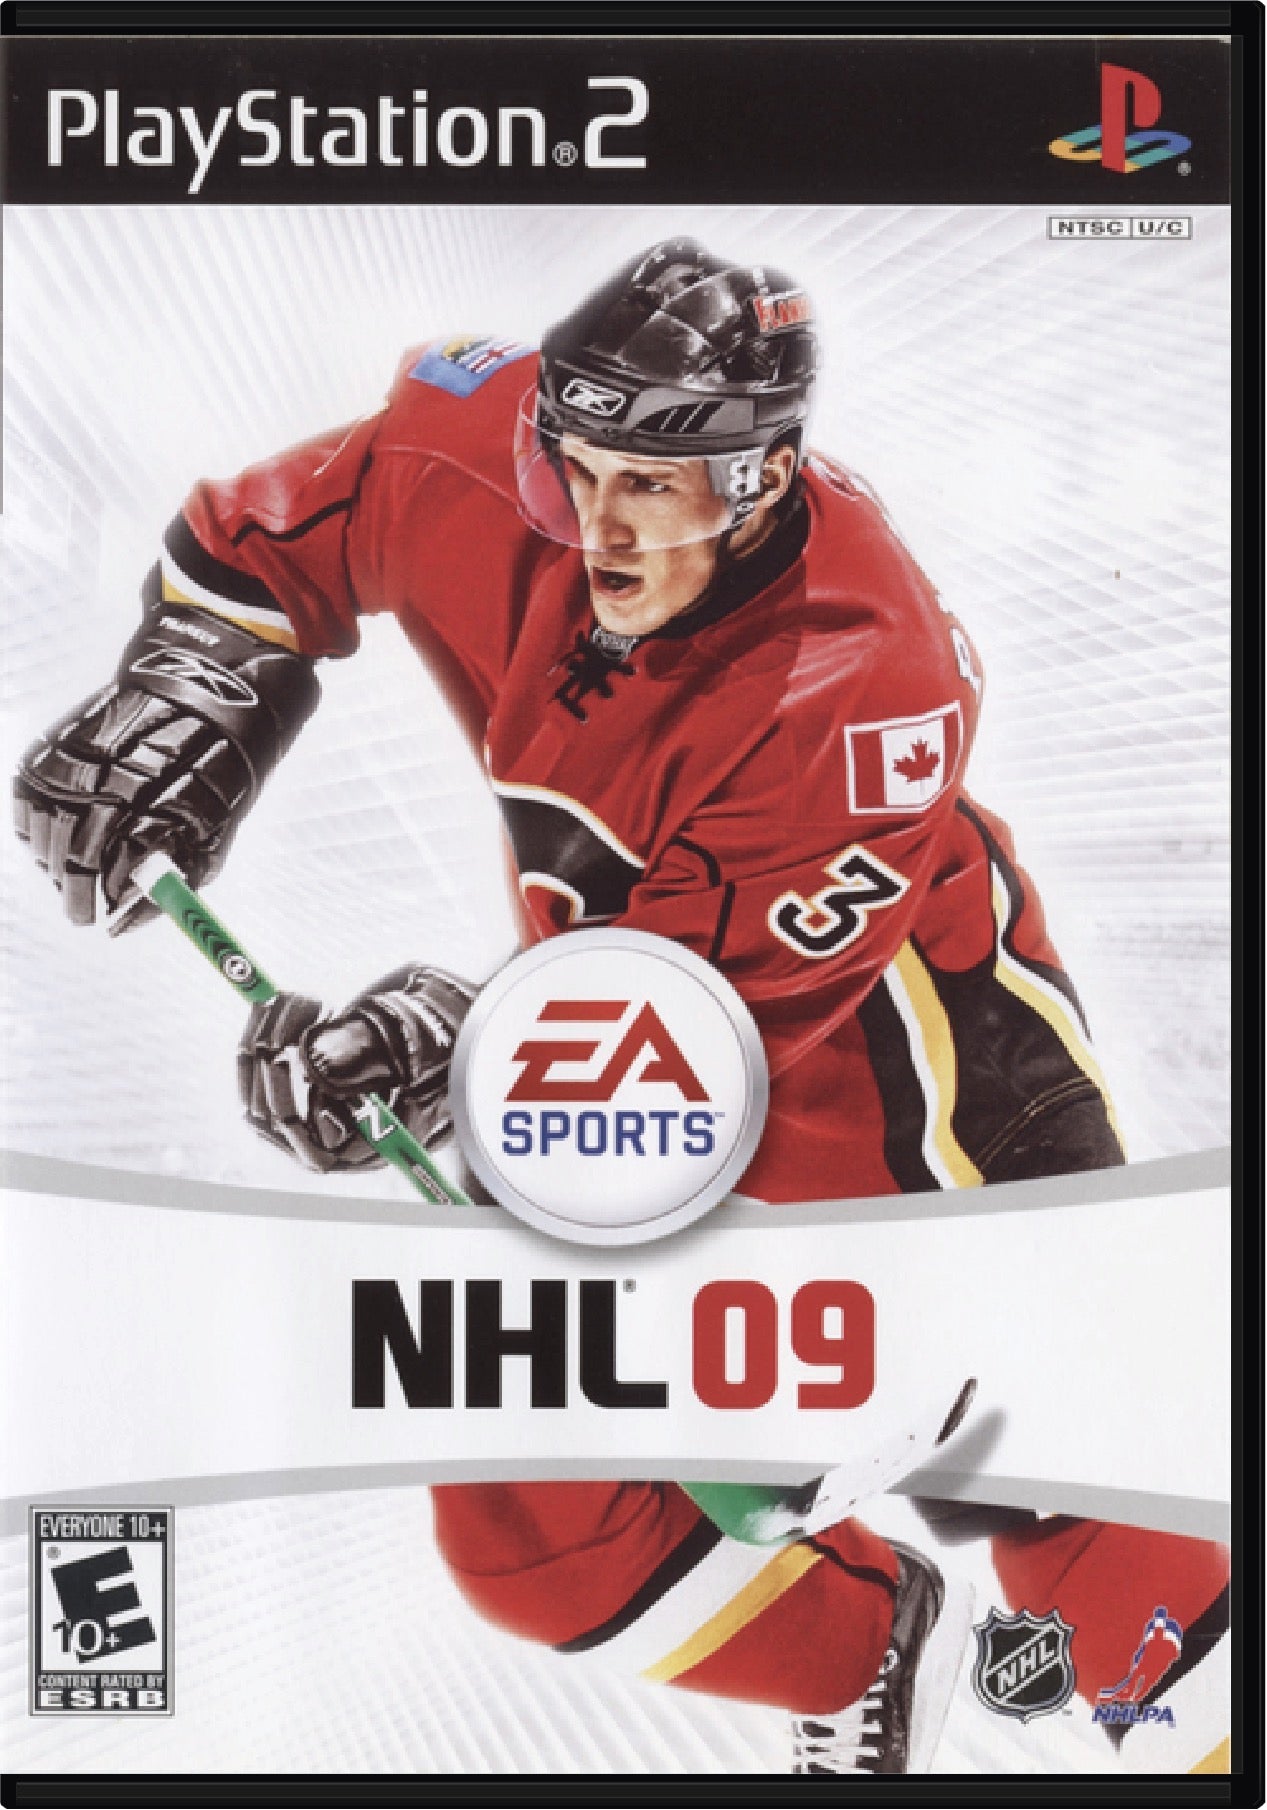 NHL 09 Cover Art and Product Photo